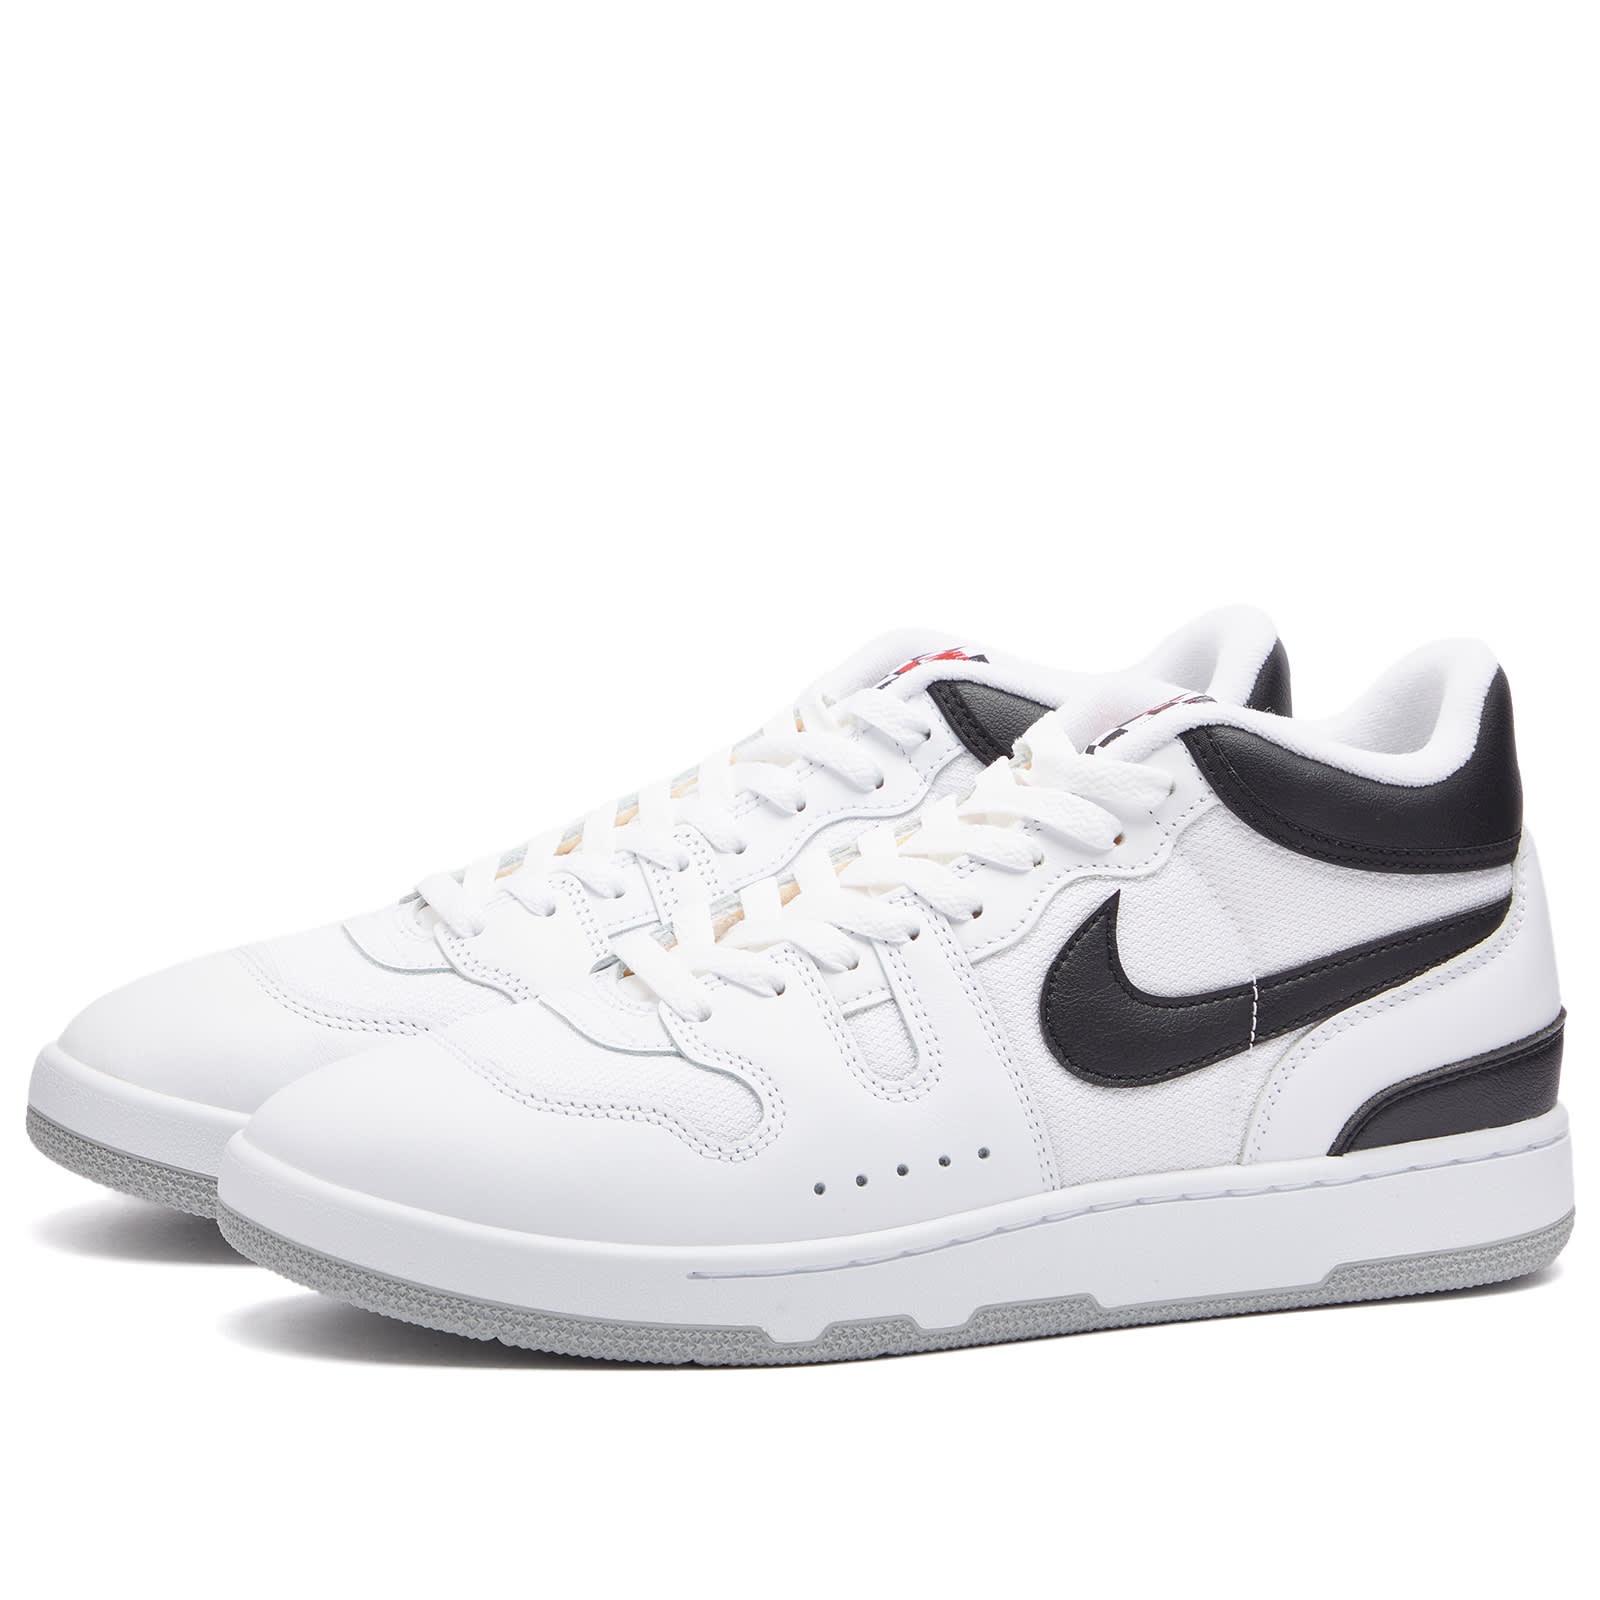 Nike Attack QS SP - 1